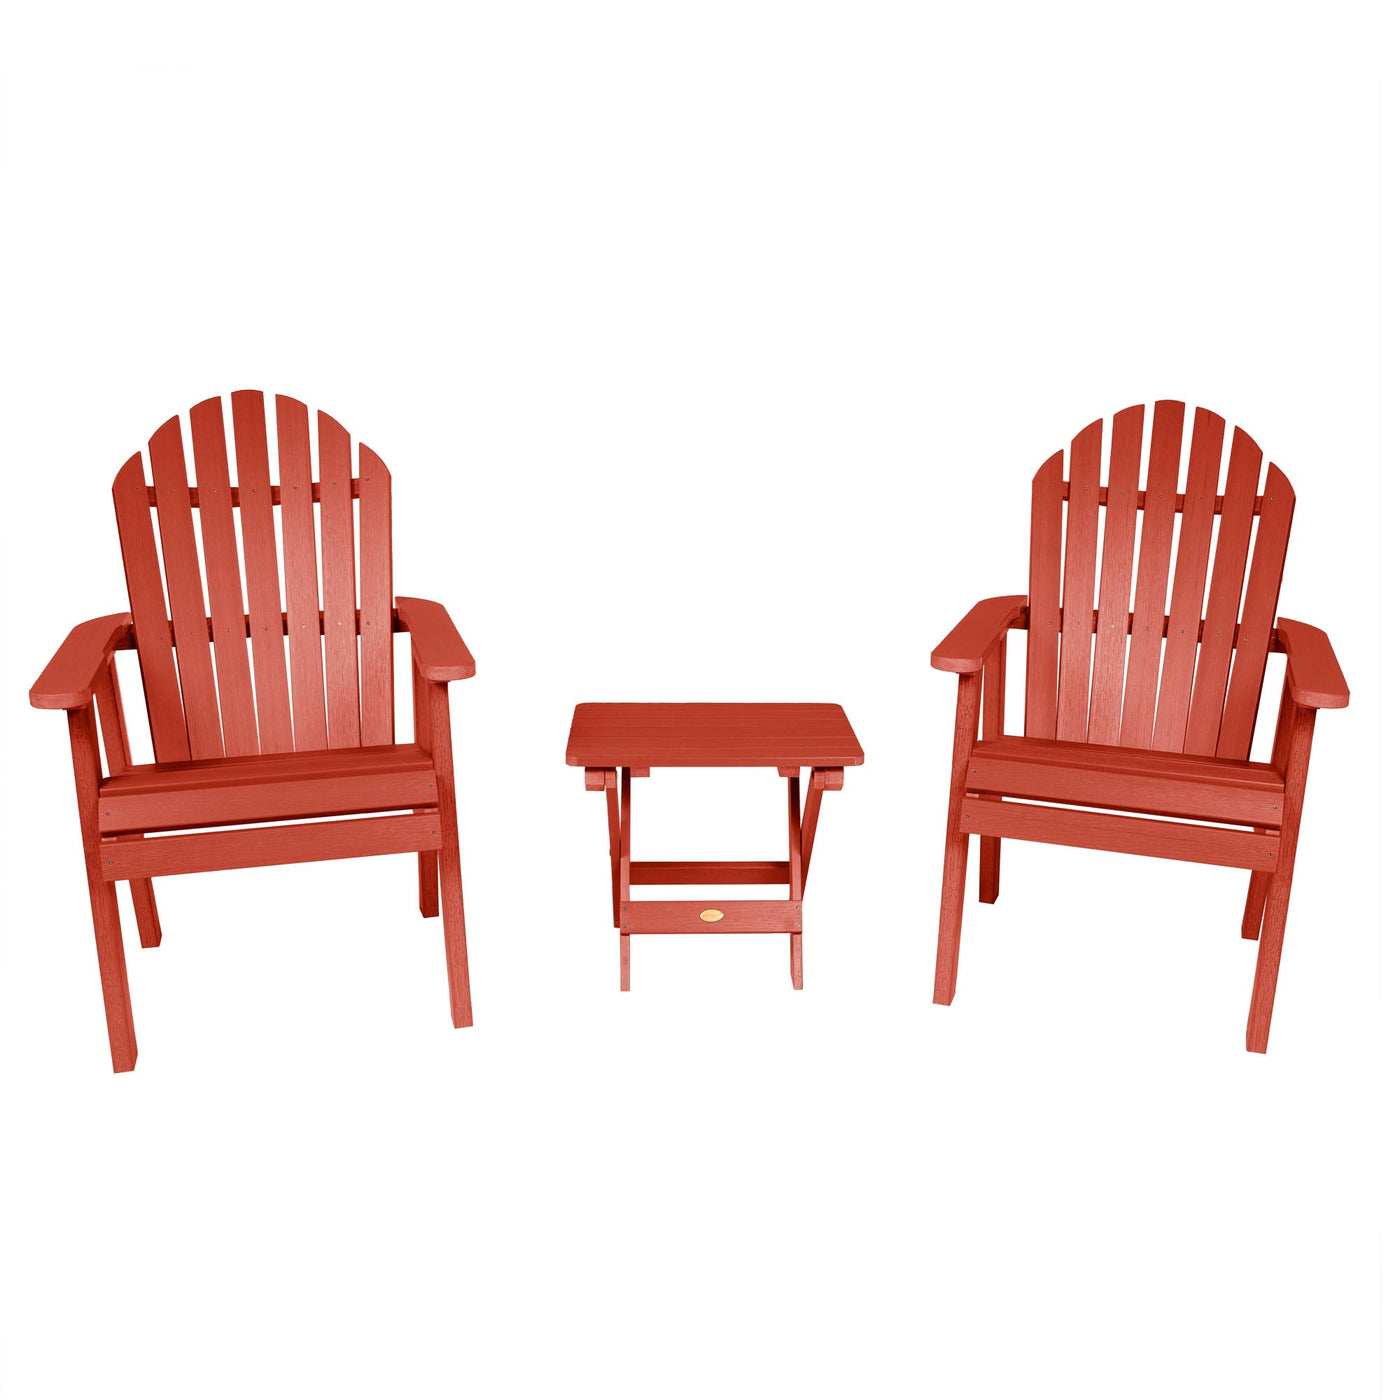 2 Hamilton Deck Chairs with Folding Side Table Kitted Sets Highwood USA Rustic Red 